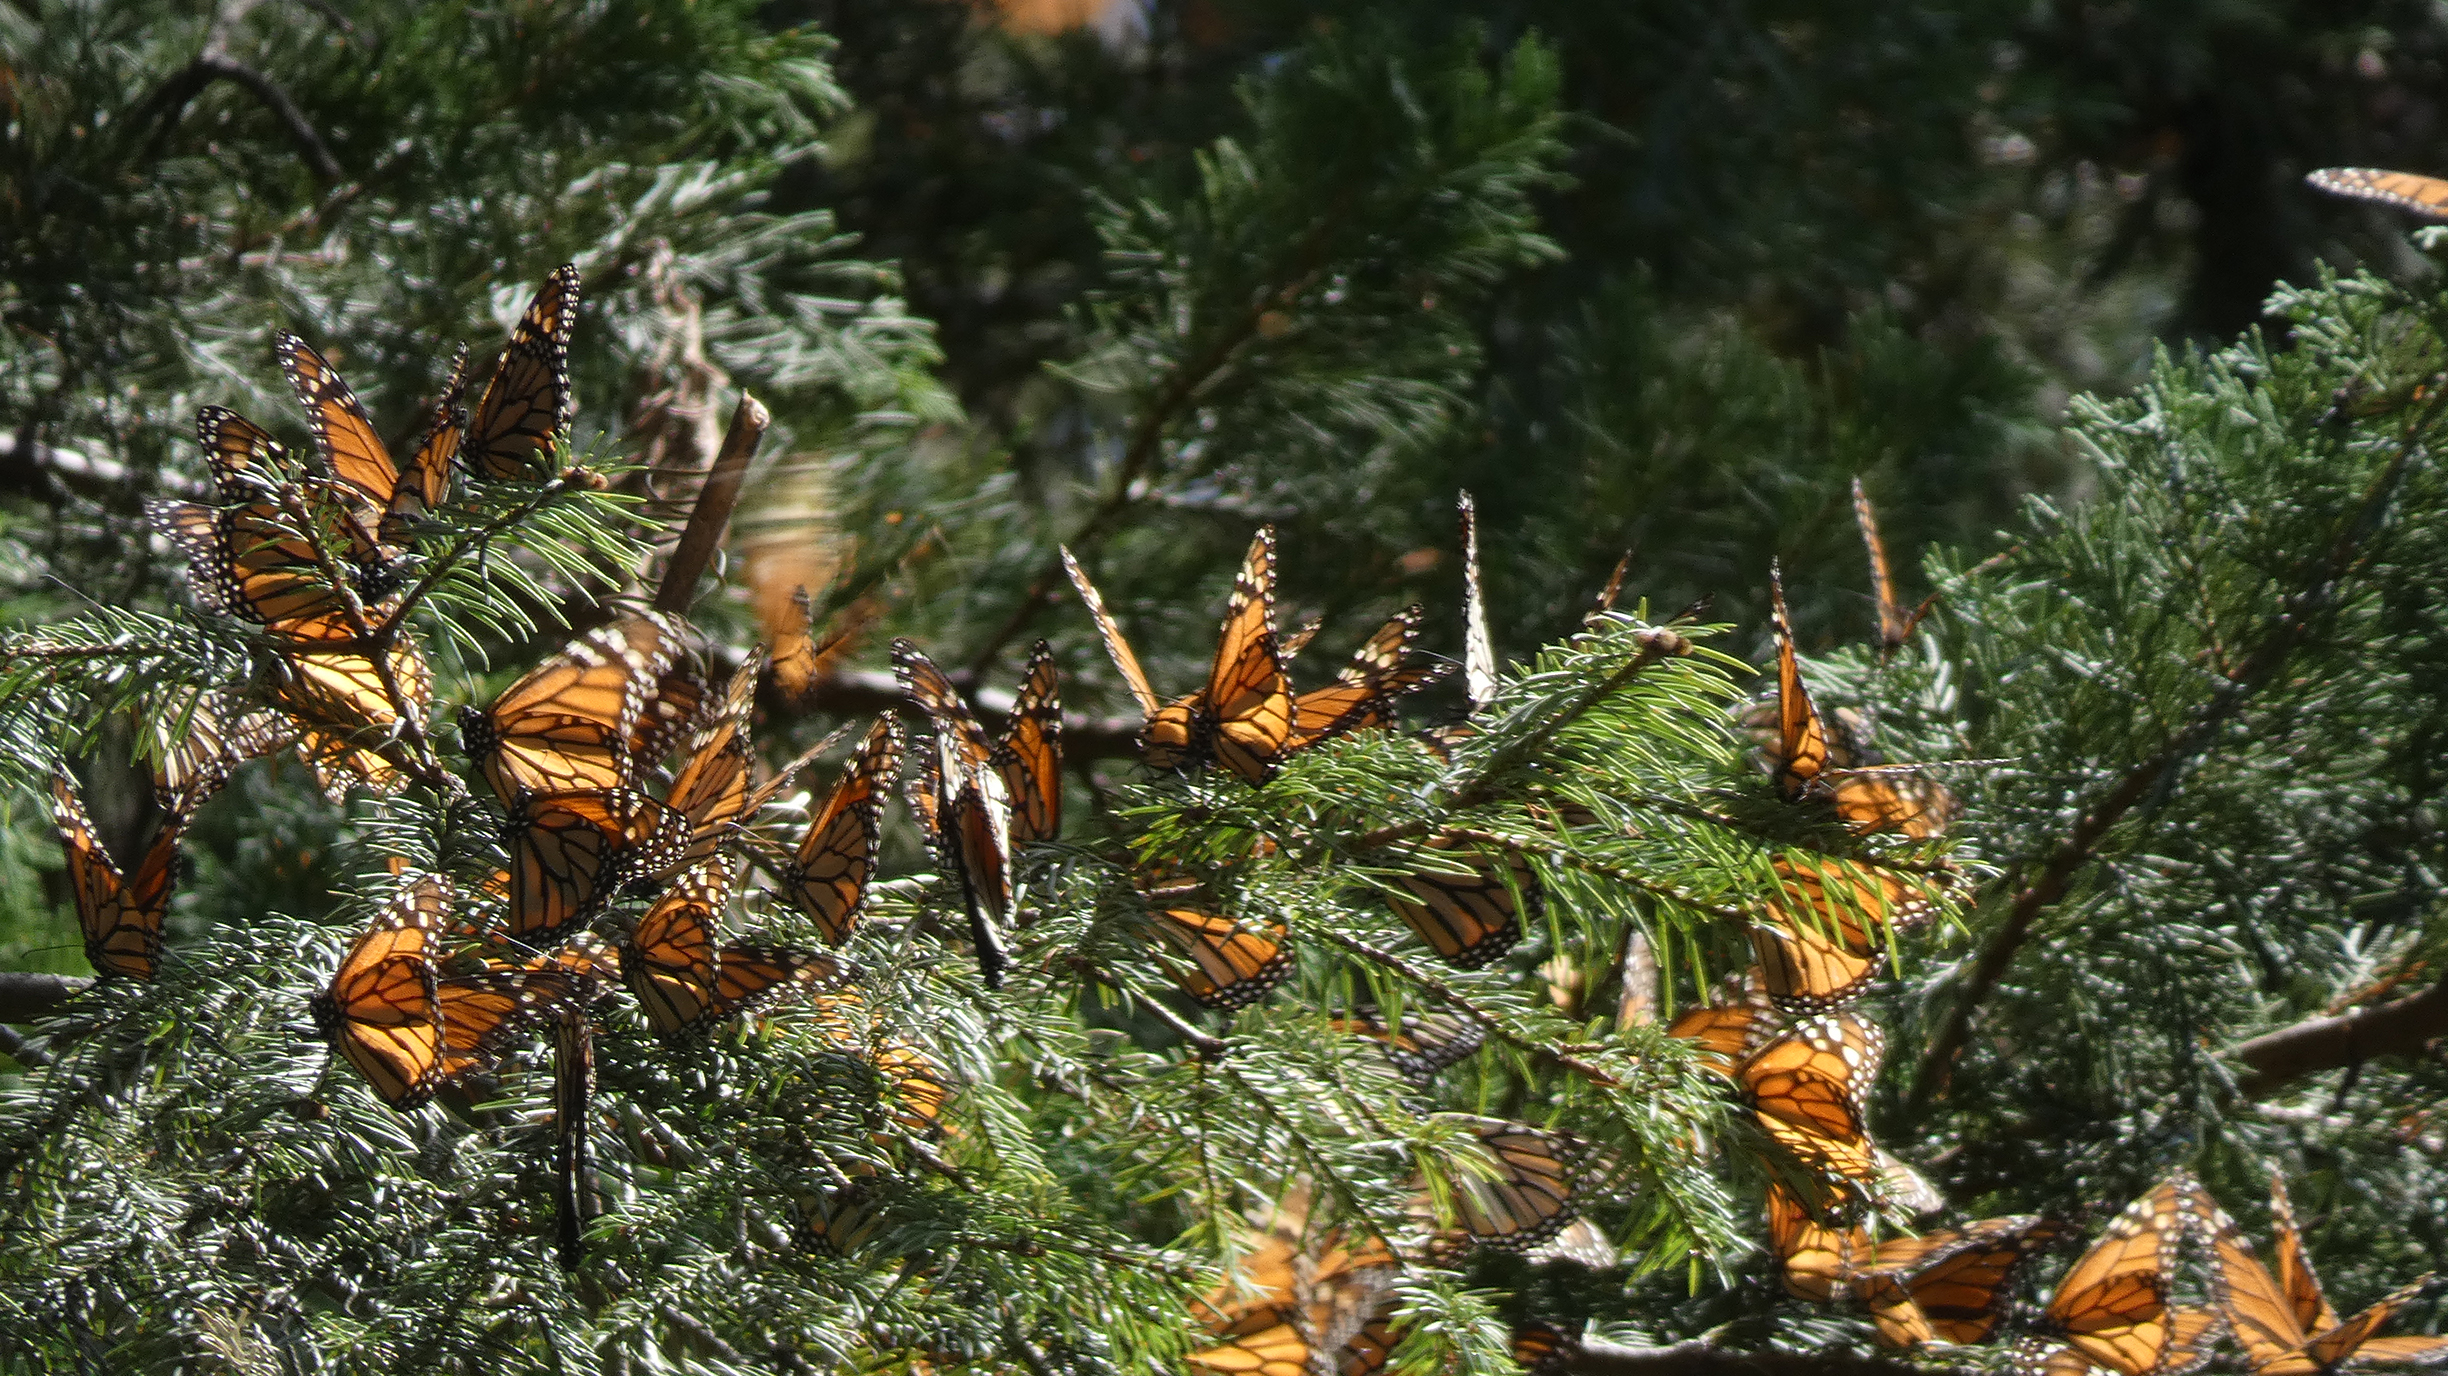 Monarchs on branches.